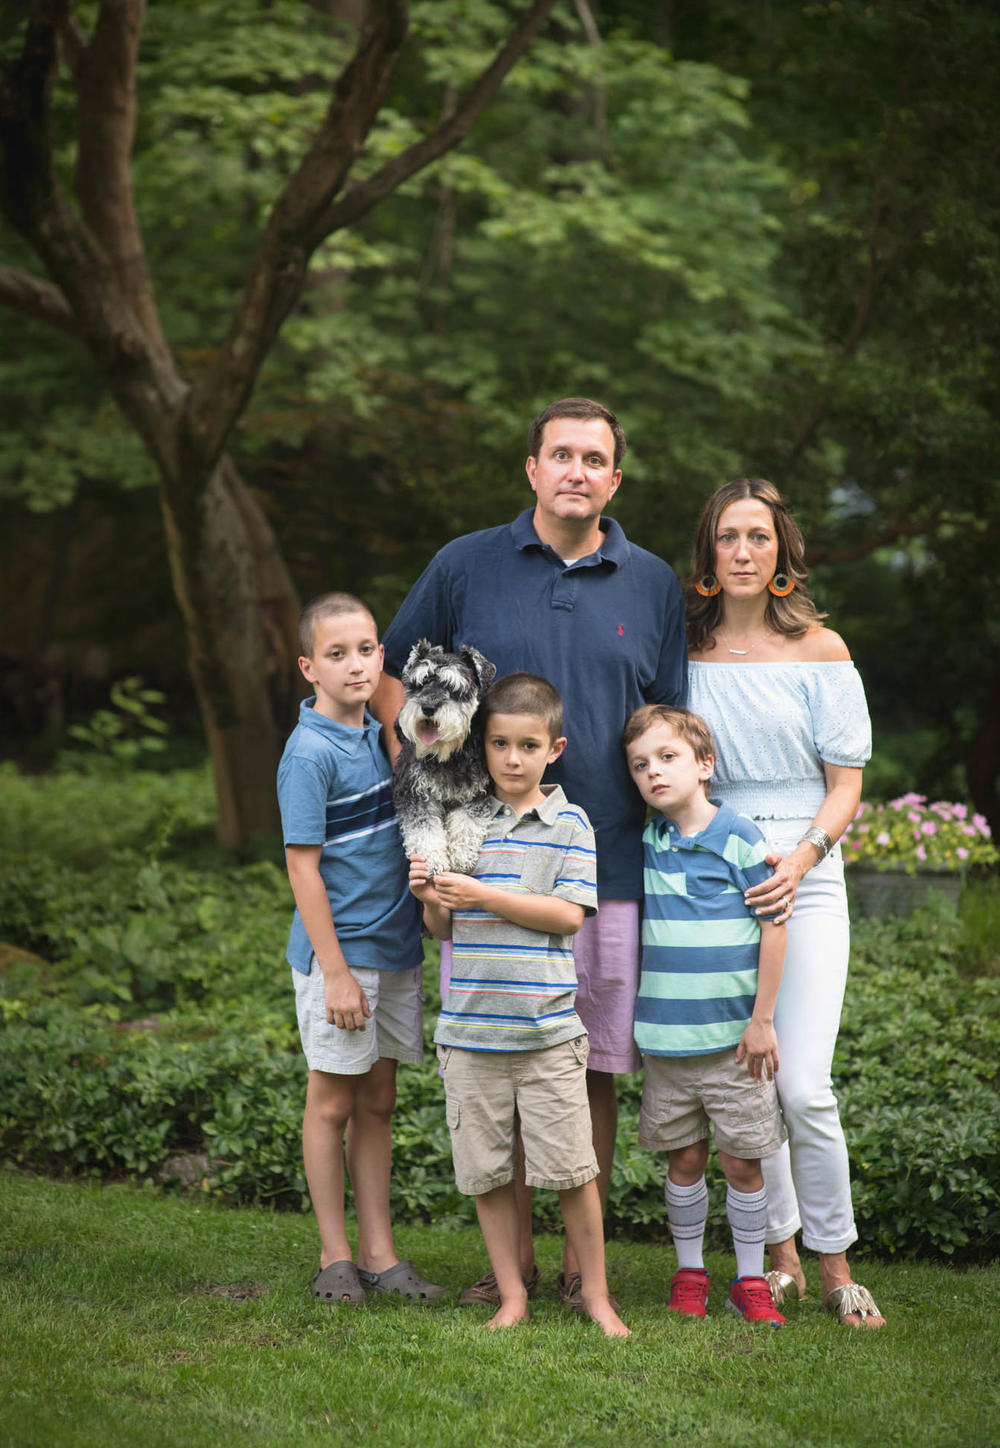 Parents Christopher and Jessica Curran at home in Connecticut with their sons (from left) Kyle, Will and Conner.